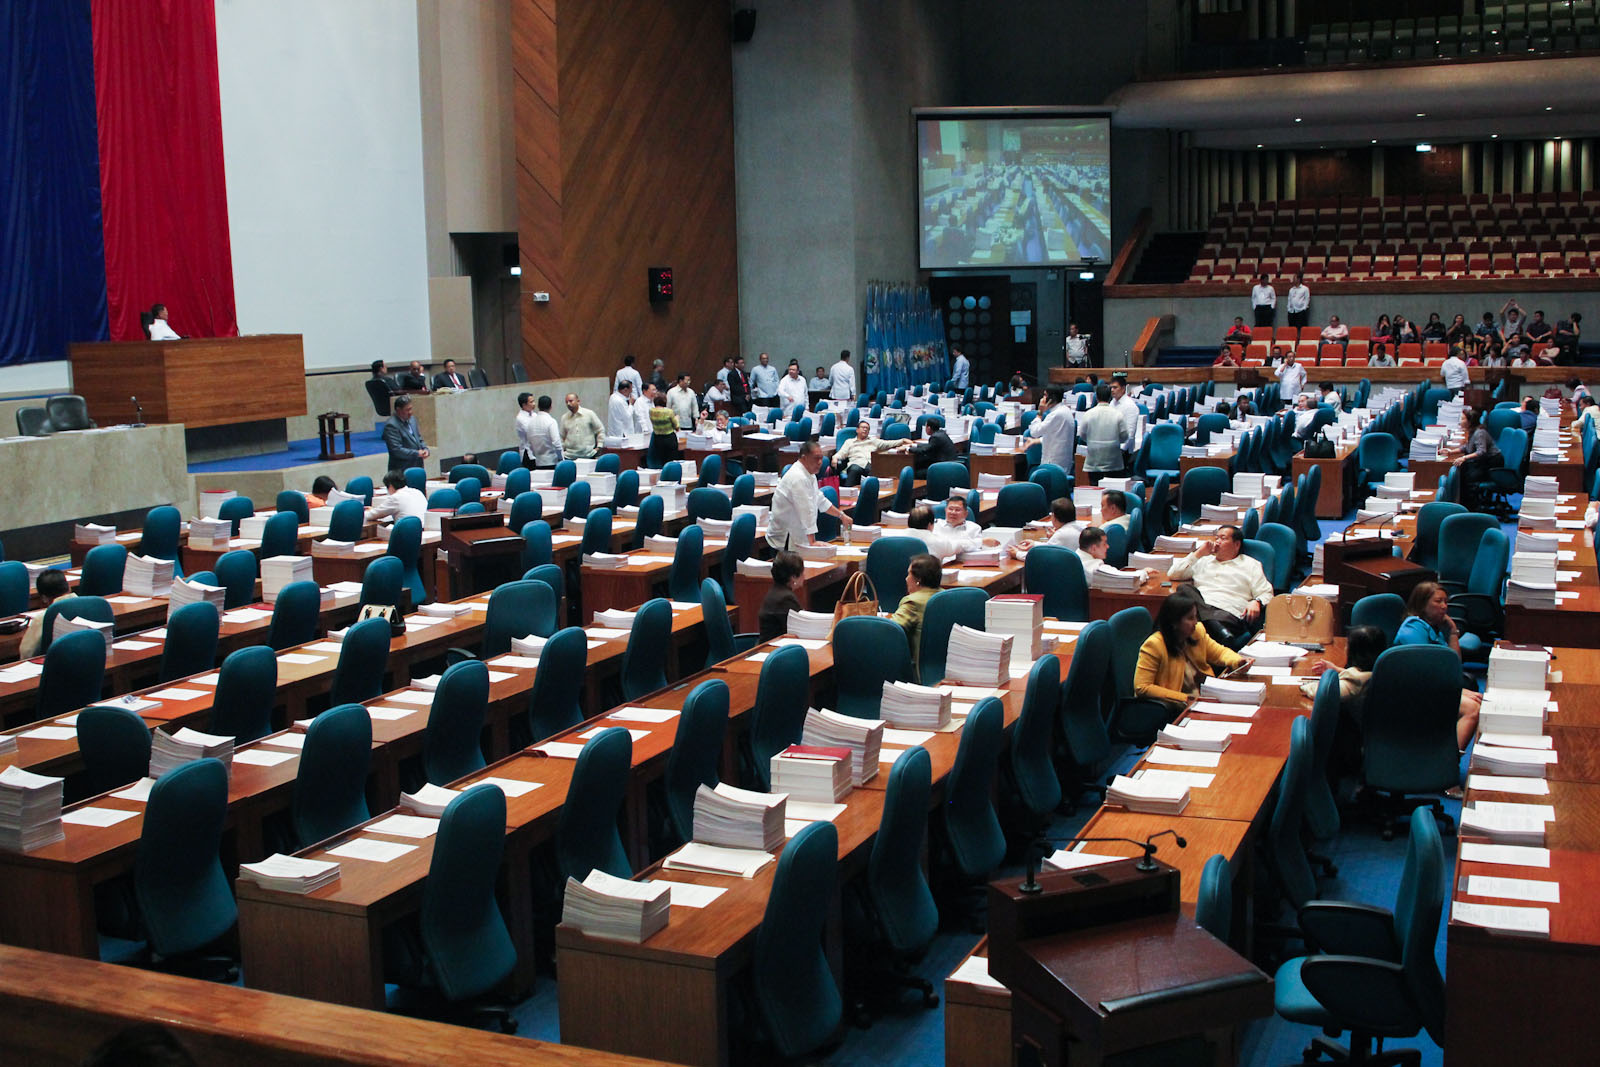 Most of the seats of the House members are empty as interpellation for House Bill 5811 continued on June 4, 2015. Session was adjourned before 6 p.m. on August 4, supposedly the resumption of the period of interpellation on HB 5811, due to lack of quorum. MindaNews file photo by Toto Lozano